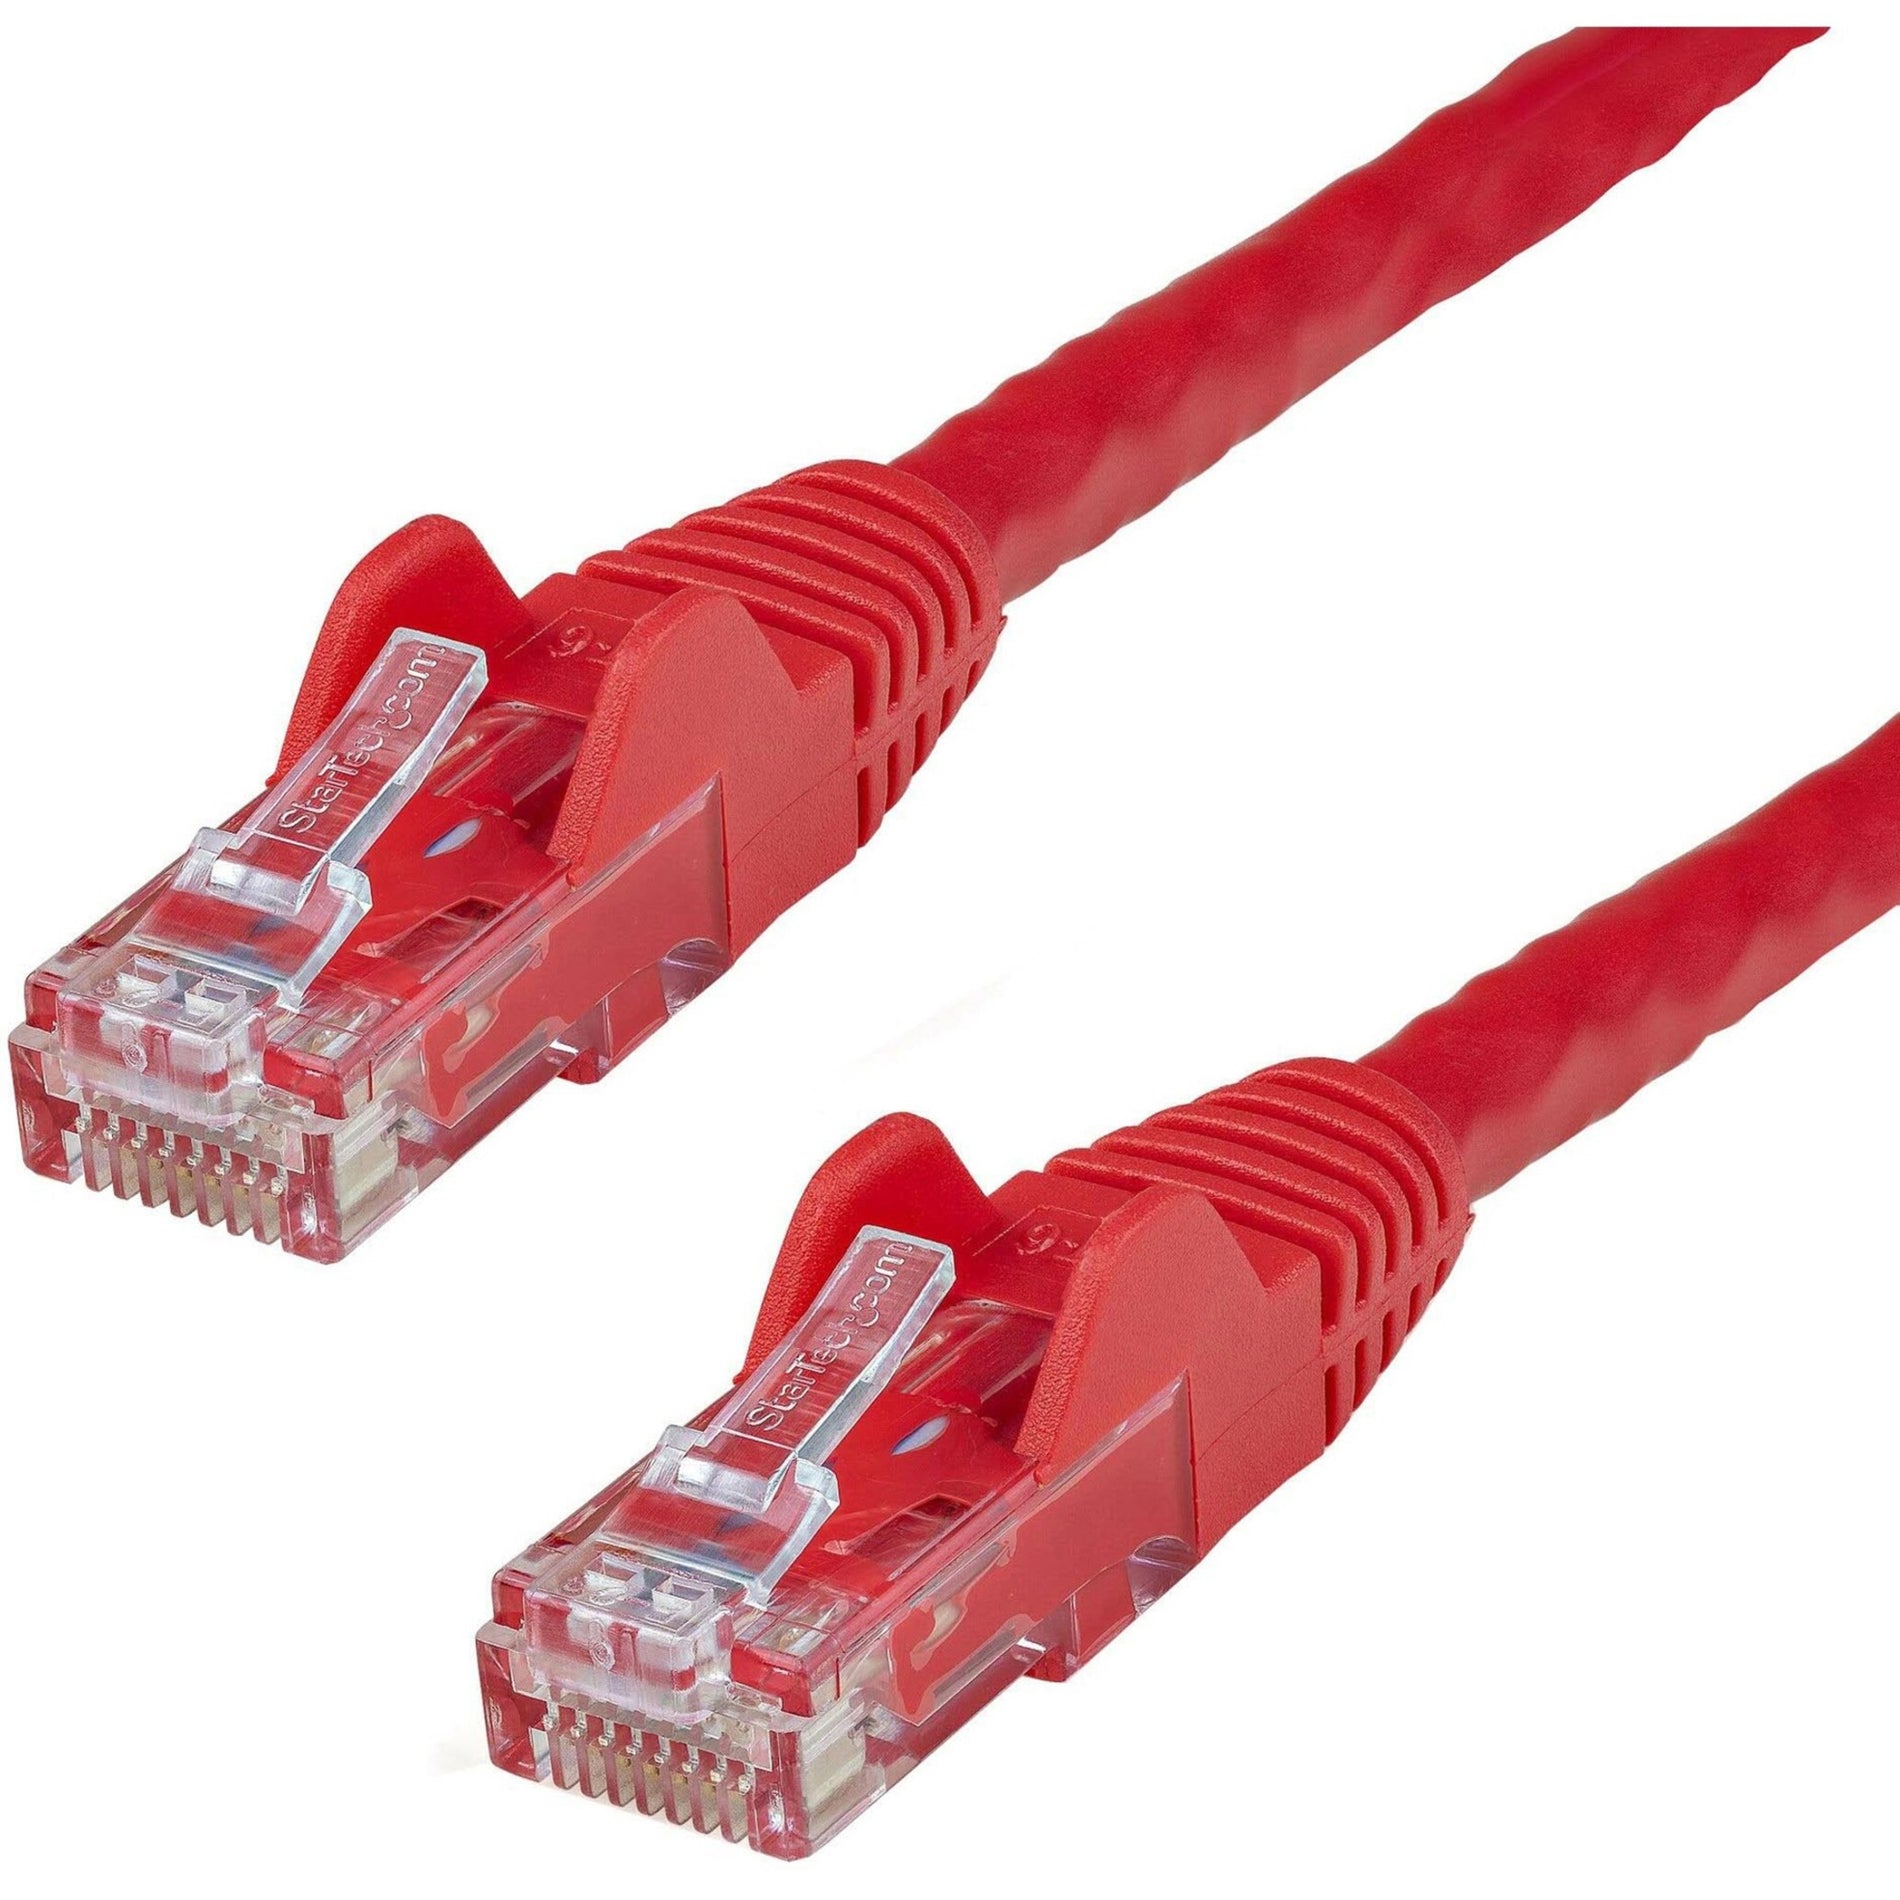 StarTech.com N6PATCH75RD 75 ft Red Snagless Cat6 UTP Patch Cable, Lifetime Warranty, 10 Gbit/s Data Transfer Rate, Gold Connectors